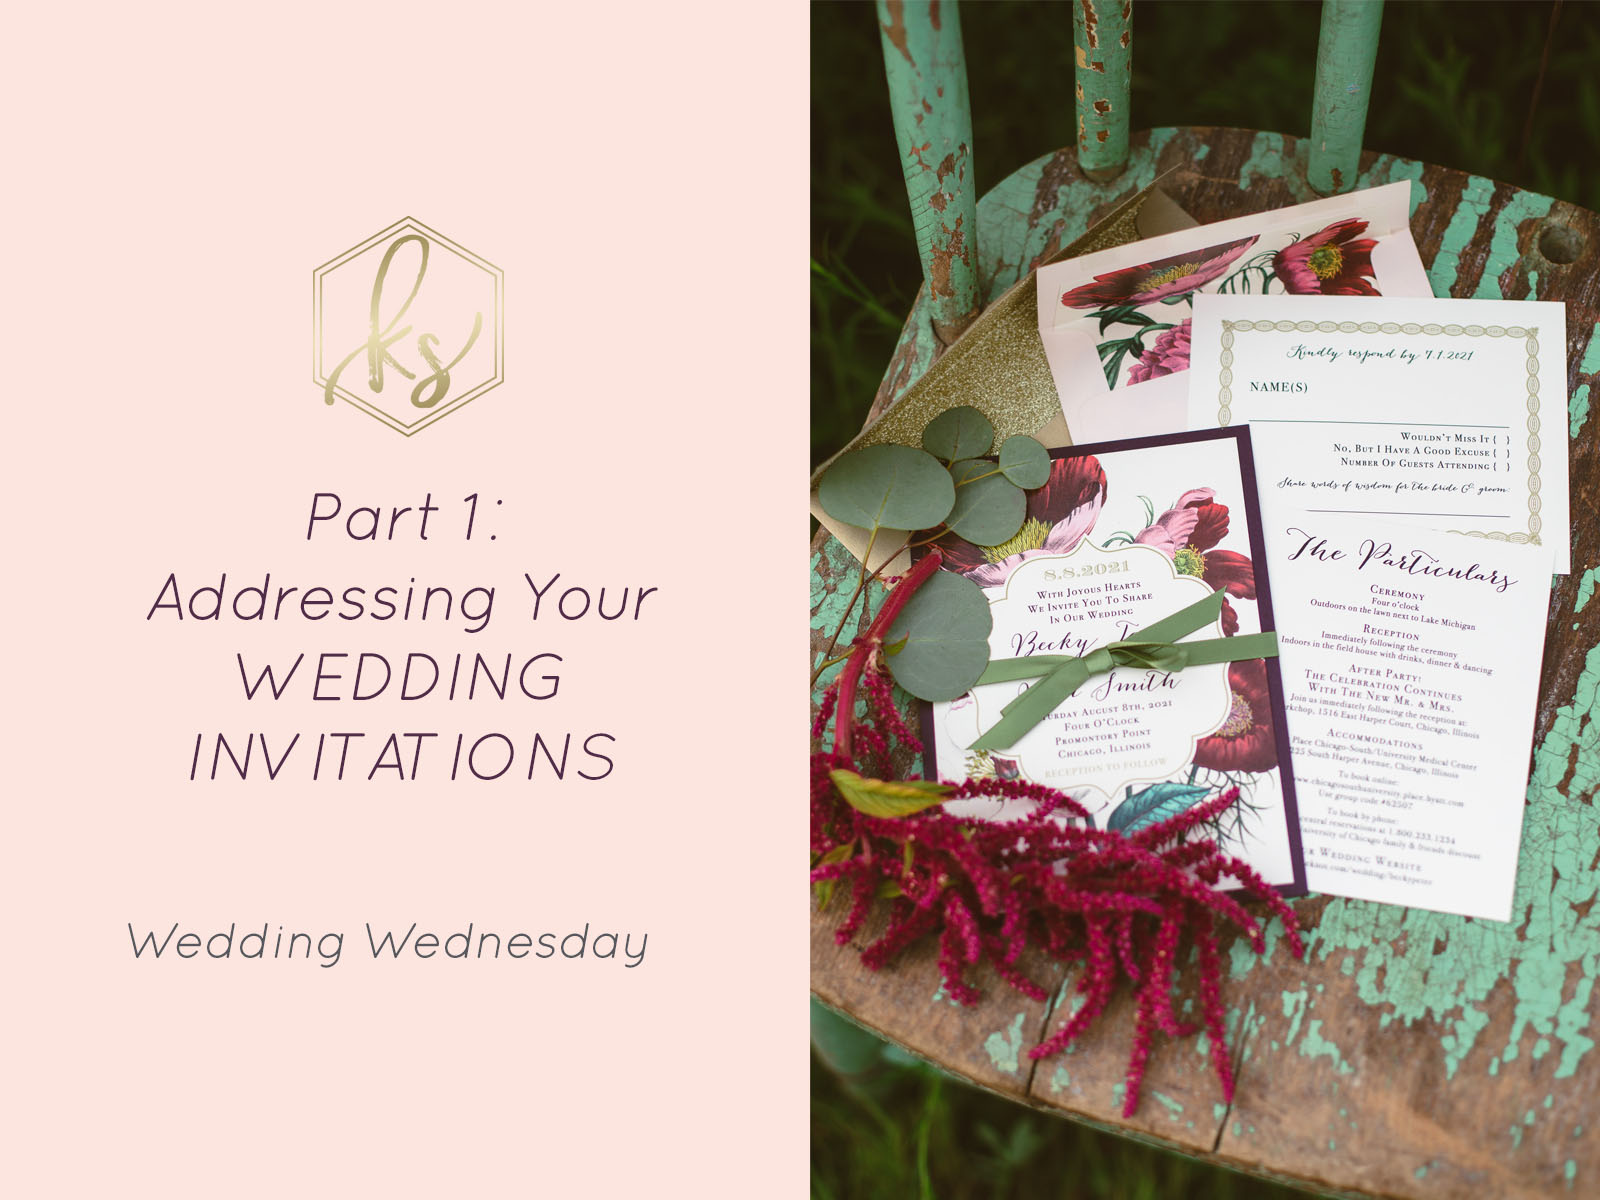 Tips for Addressing Your Wedding Invitations